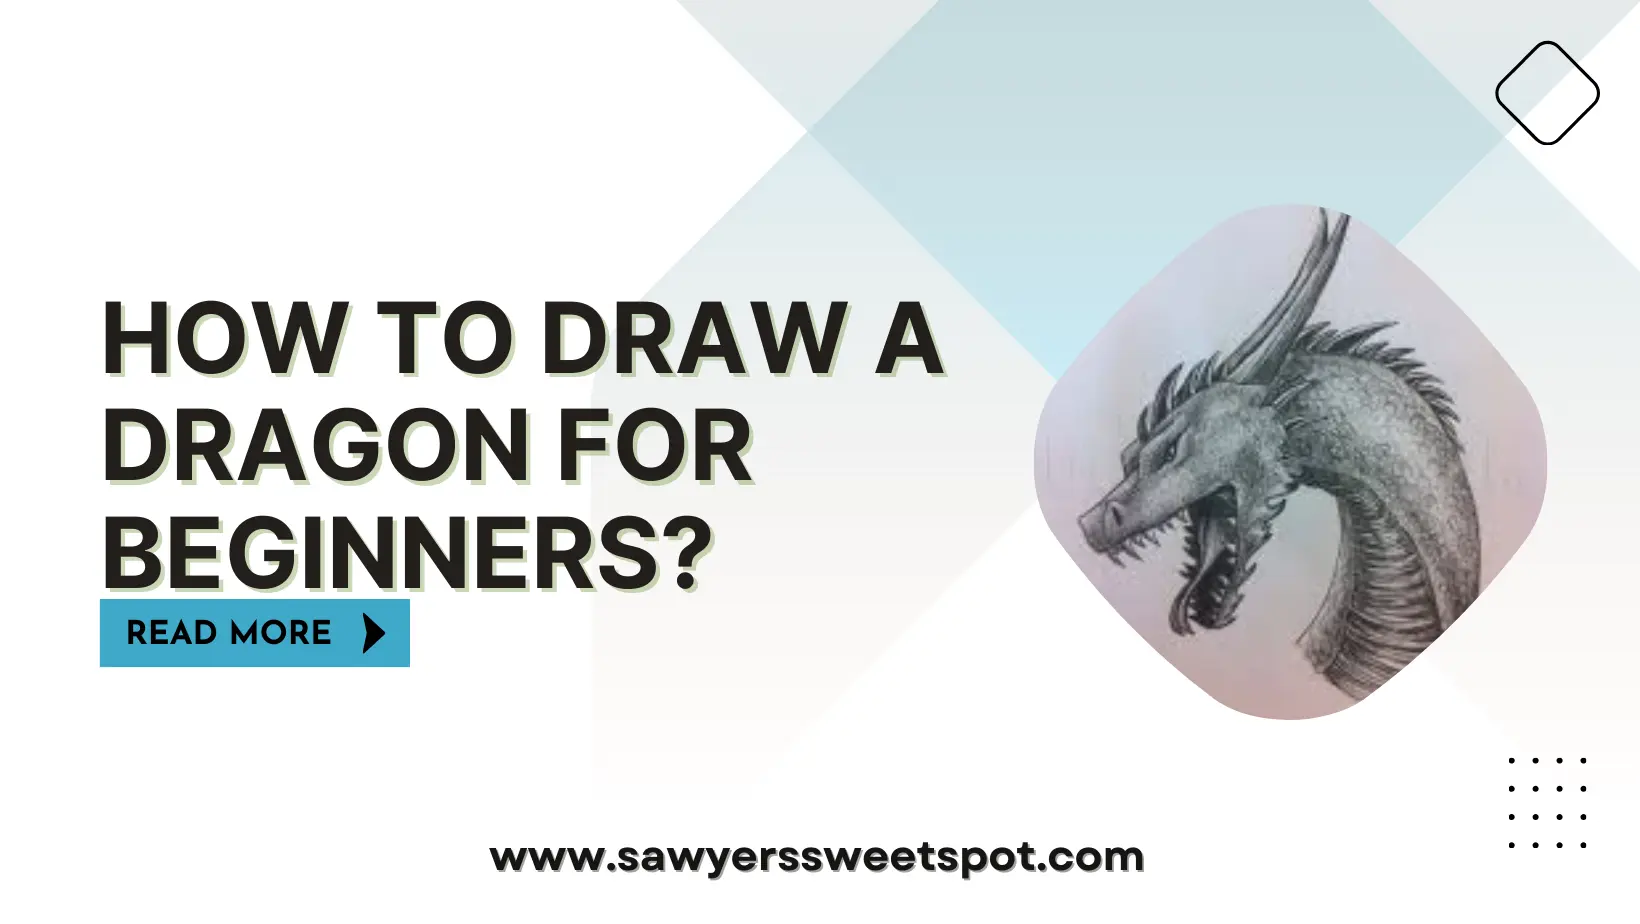 How to Draw a Dragon for Beginners?